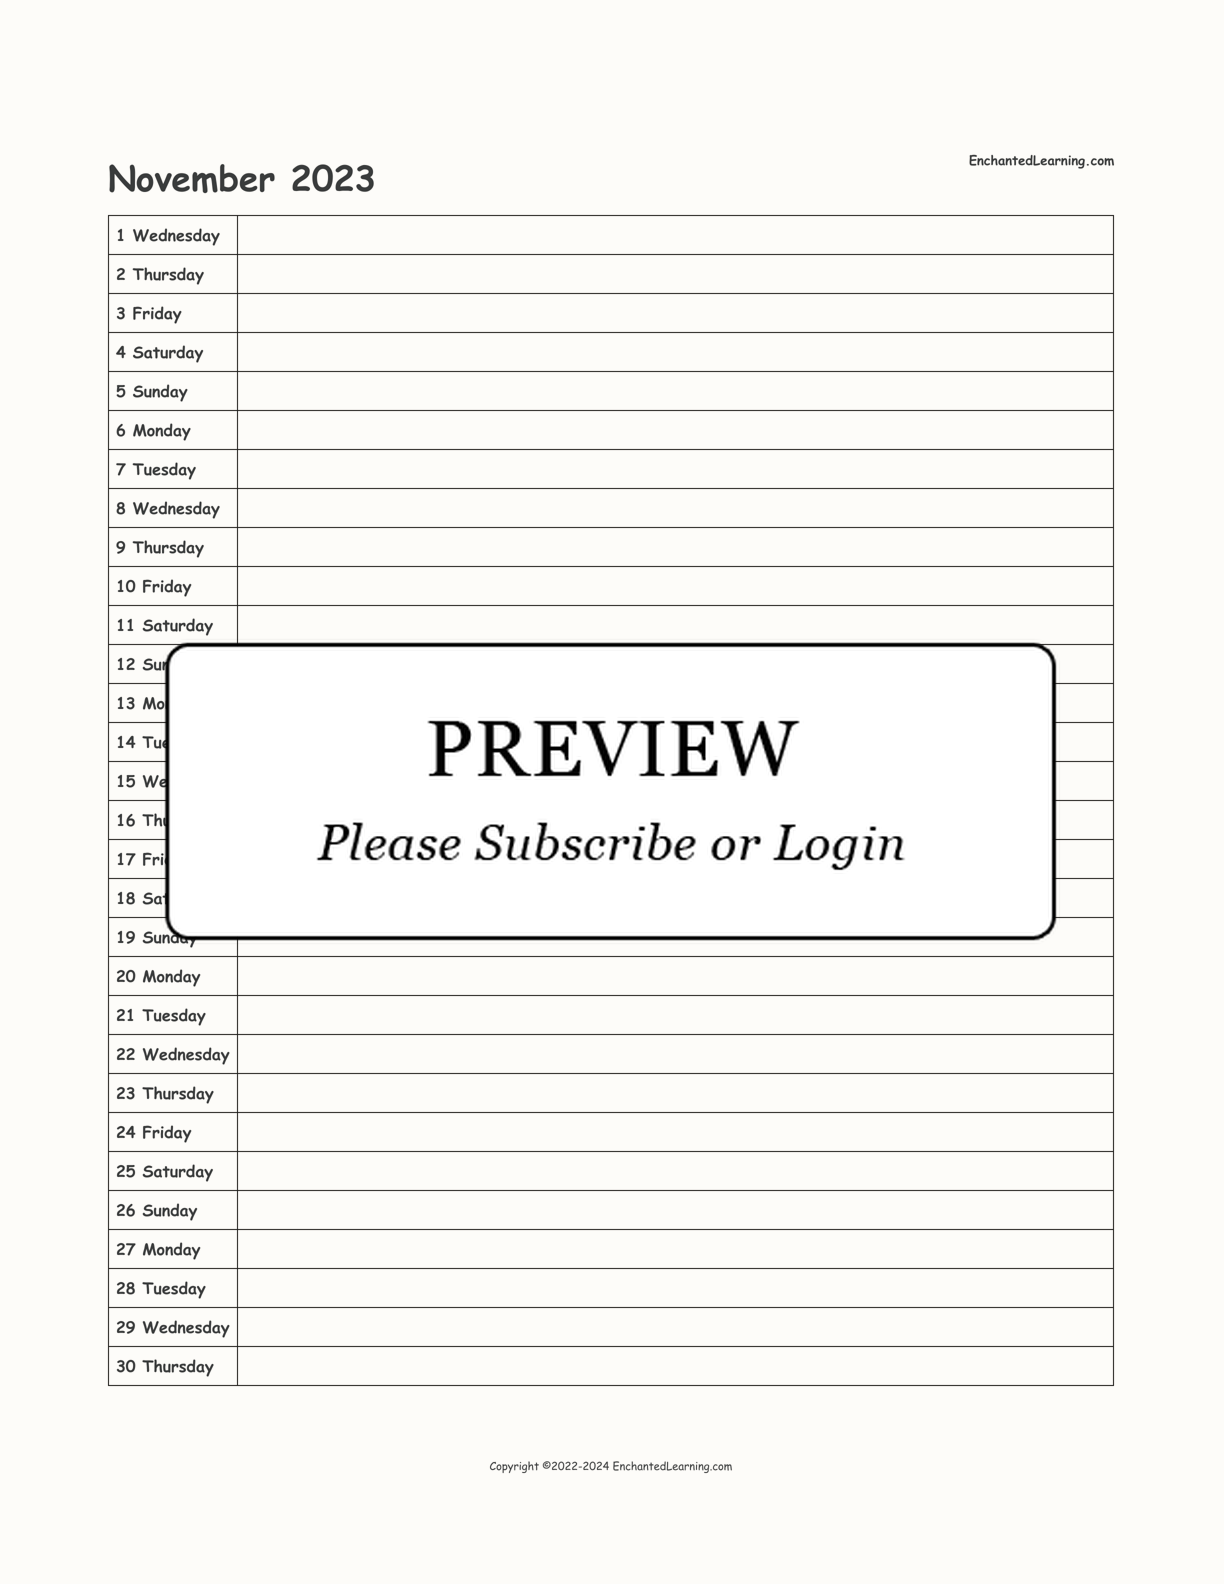 2023 Scheduling Calendar interactive printout page 11